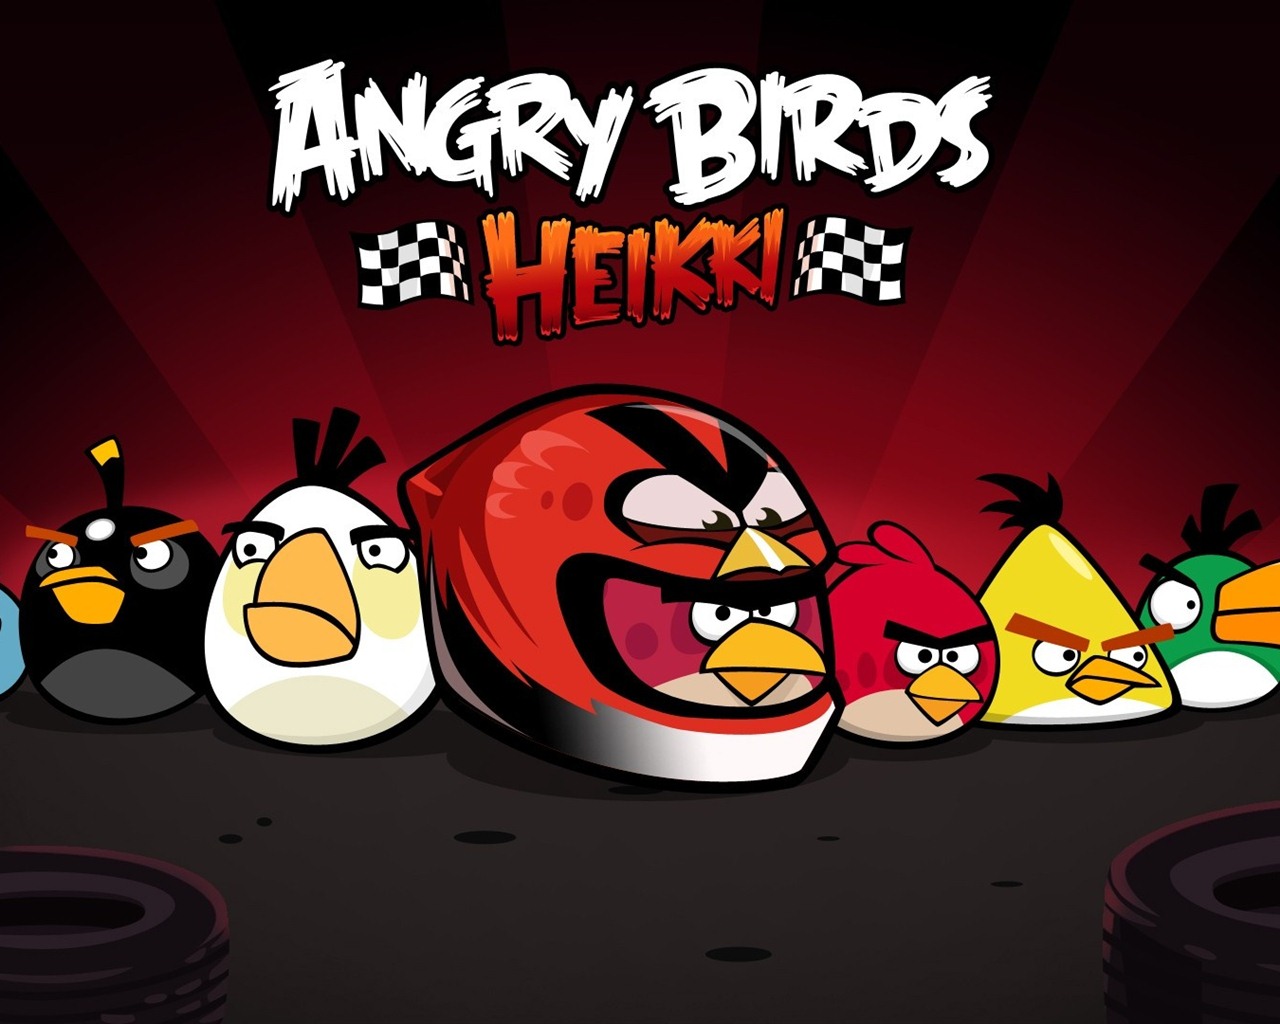 Angry Birds Game Wallpapers #9 - 1280x1024